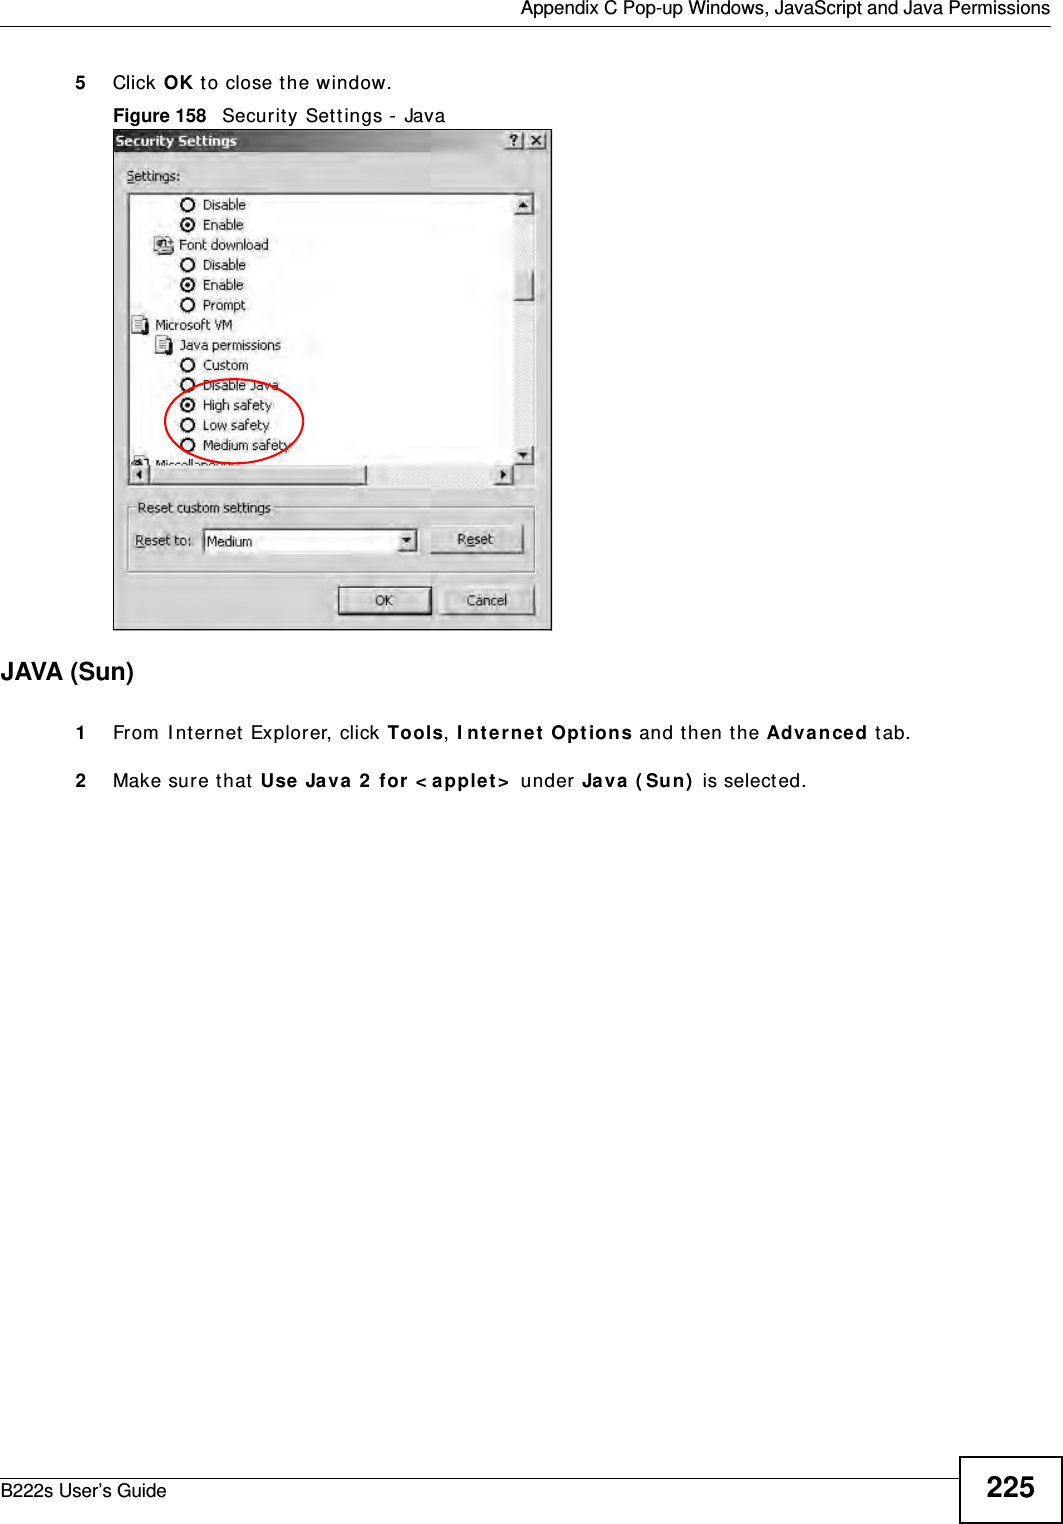  Appendix C Pop-up Windows, JavaScript and Java PermissionsB222s User’s Guide 2255Click OK t o close t he window.Figure 158   Securit y Set t ings -  Java JAVA (Sun)1From  I nt ernet Explorer, click Tools, I nt e r net  Opt ions and t hen t he Adva nced t ab. 2Make sur e t hat  Use Ja va  2  for  &lt; apple t &gt;  under Java  ( Sun)  is select ed.